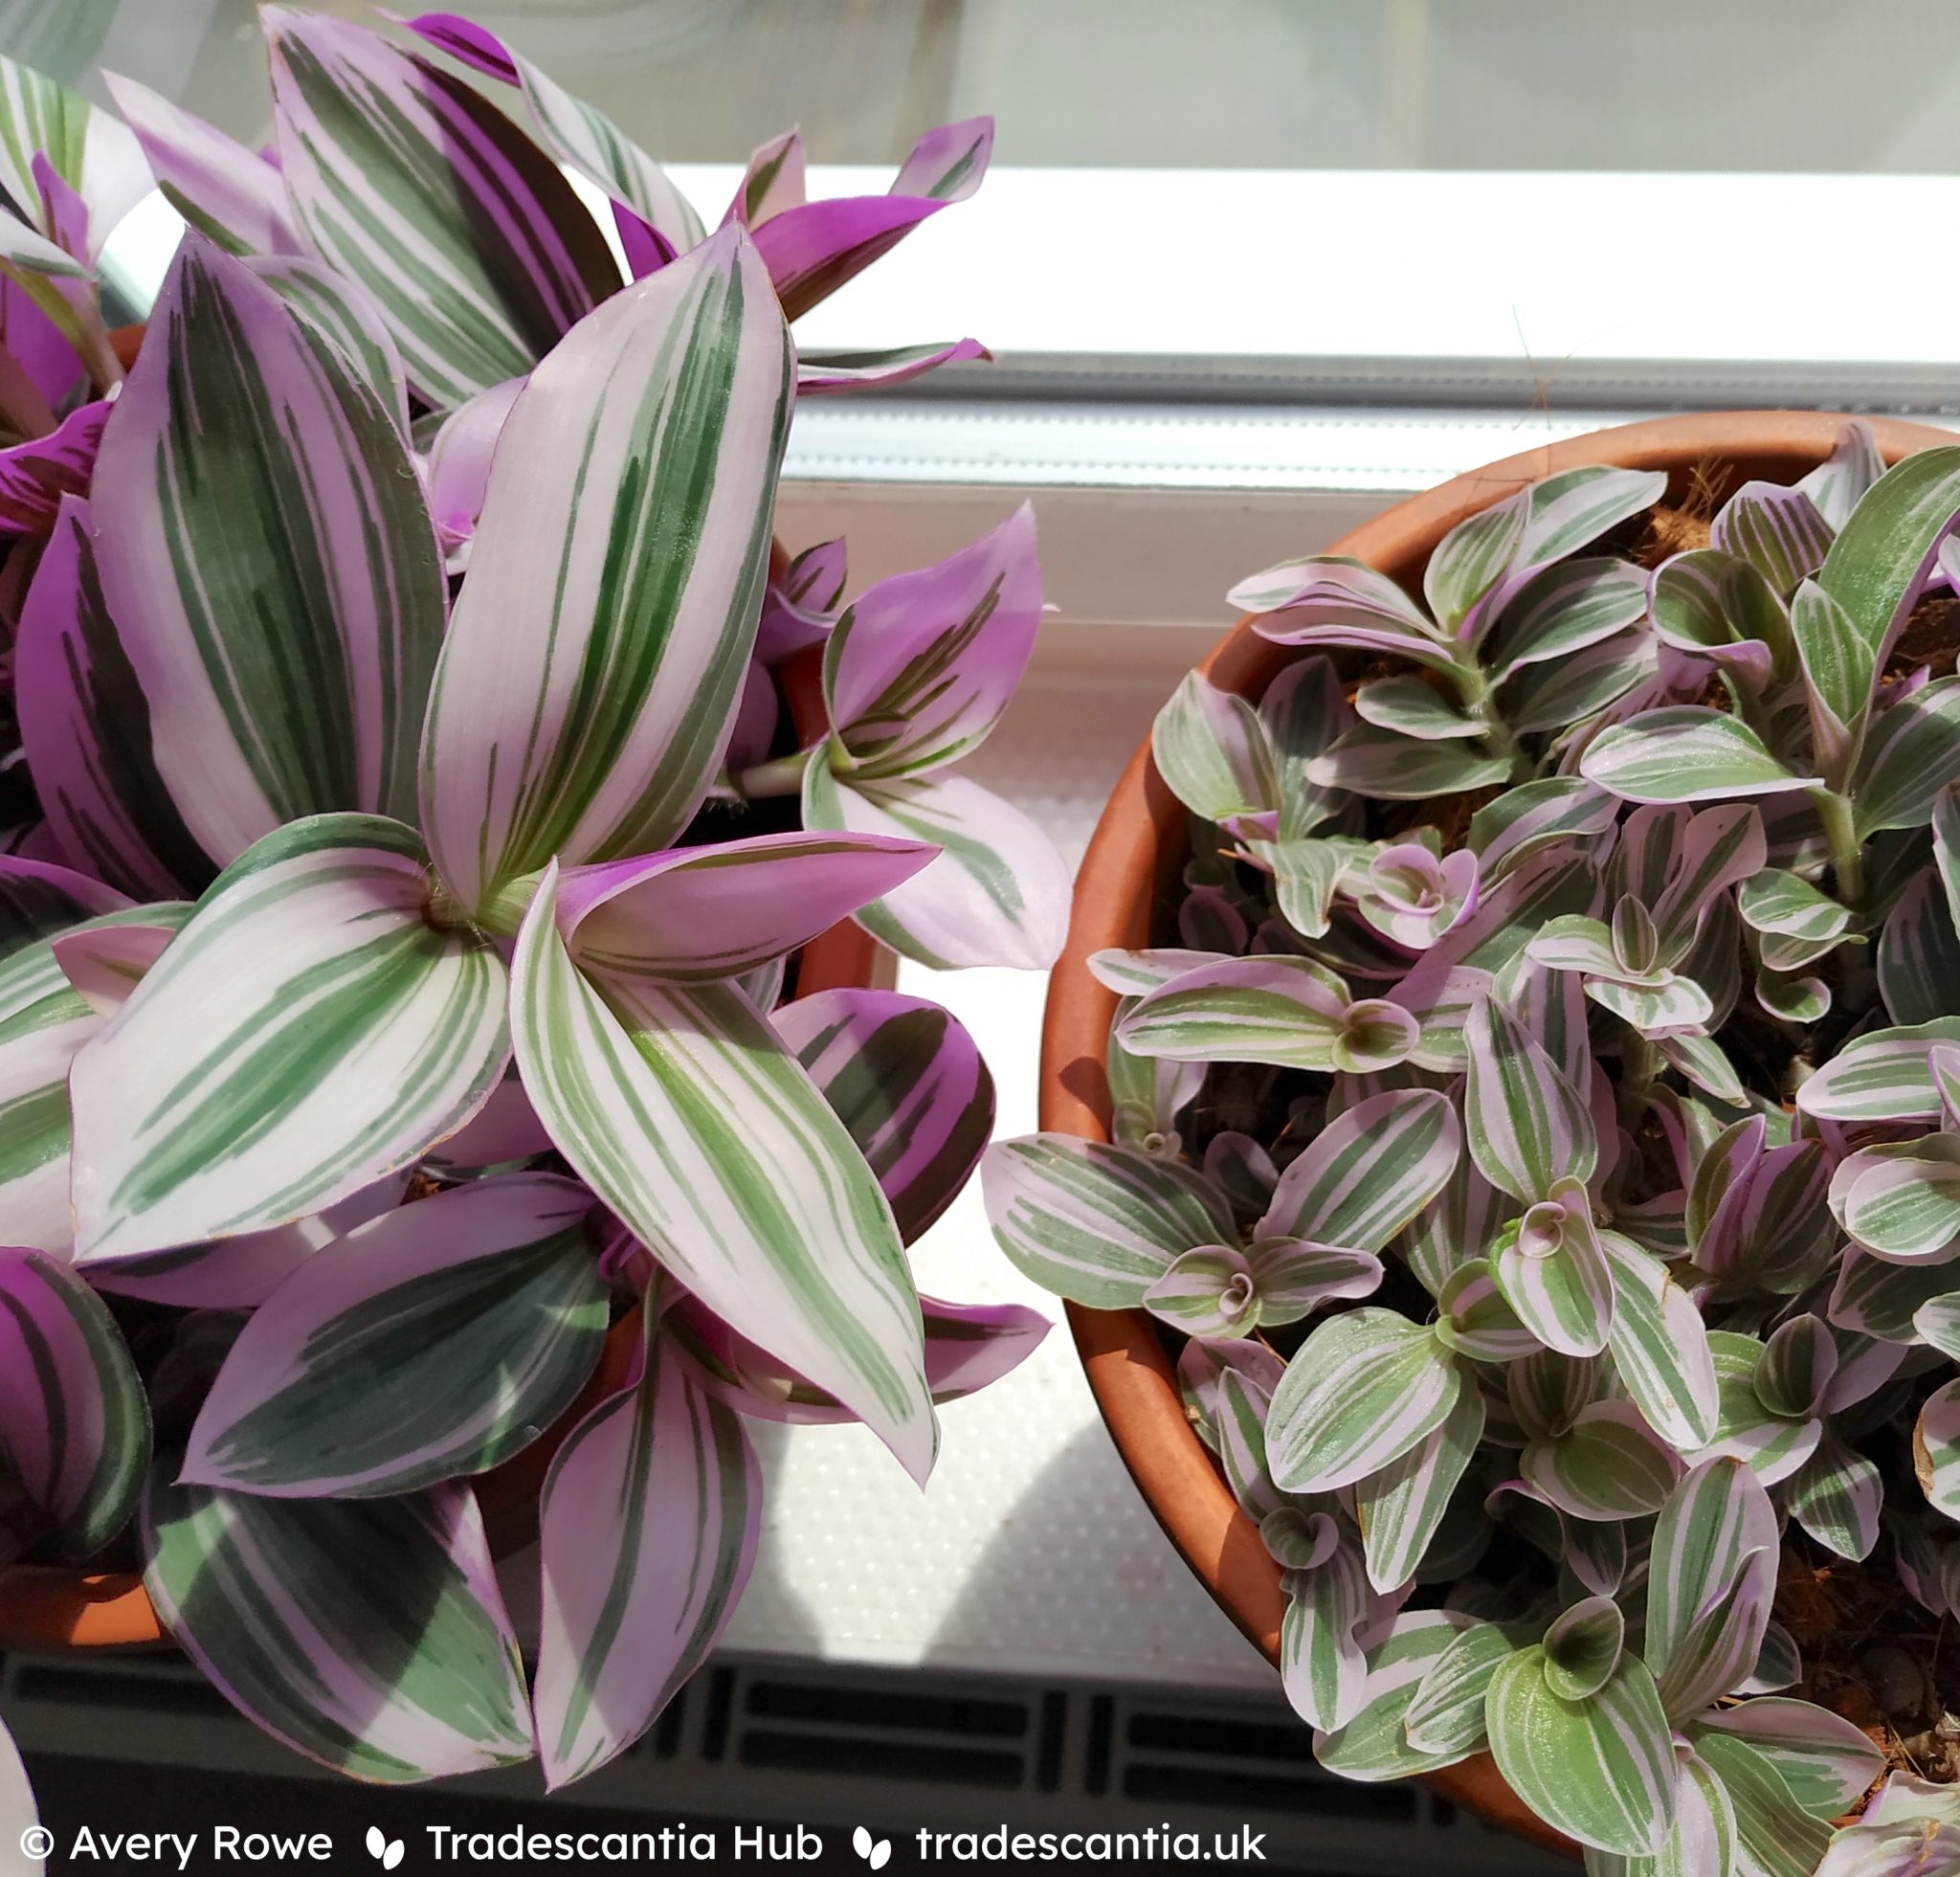 Tradescantia Hub • Cultivar research and information